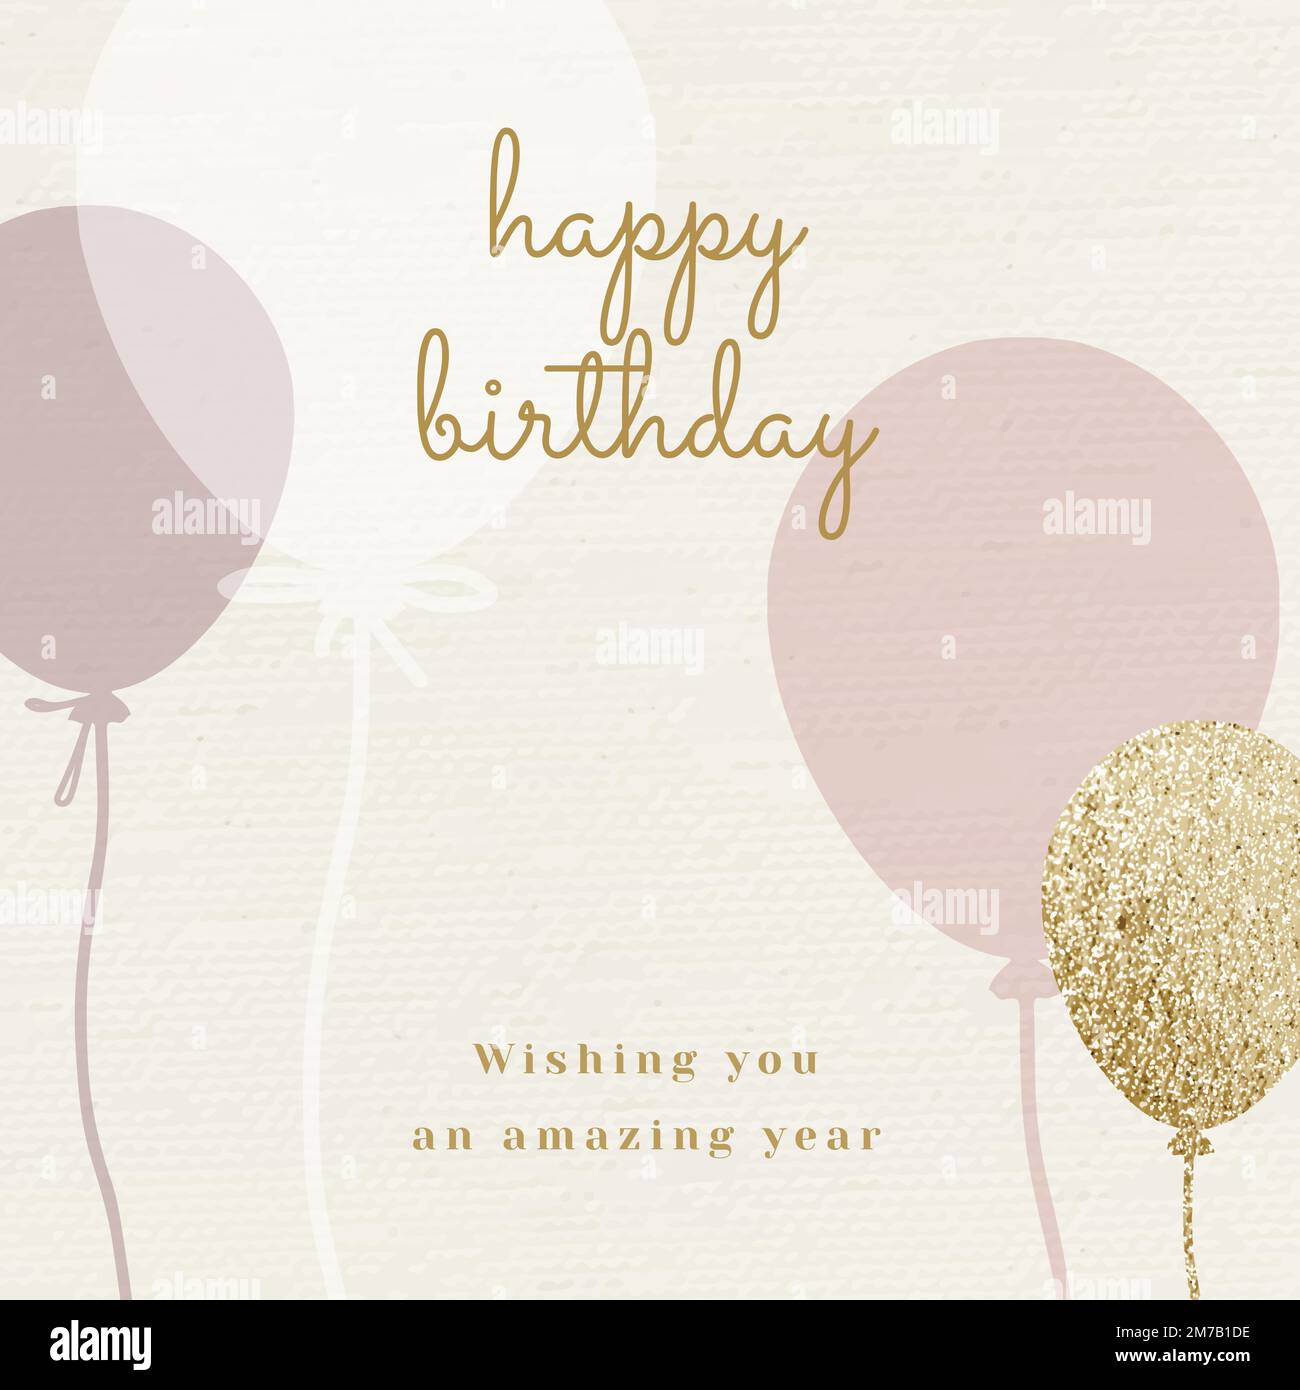 Balloon birthday greeting template vector in pink and gold tone Stock Vector